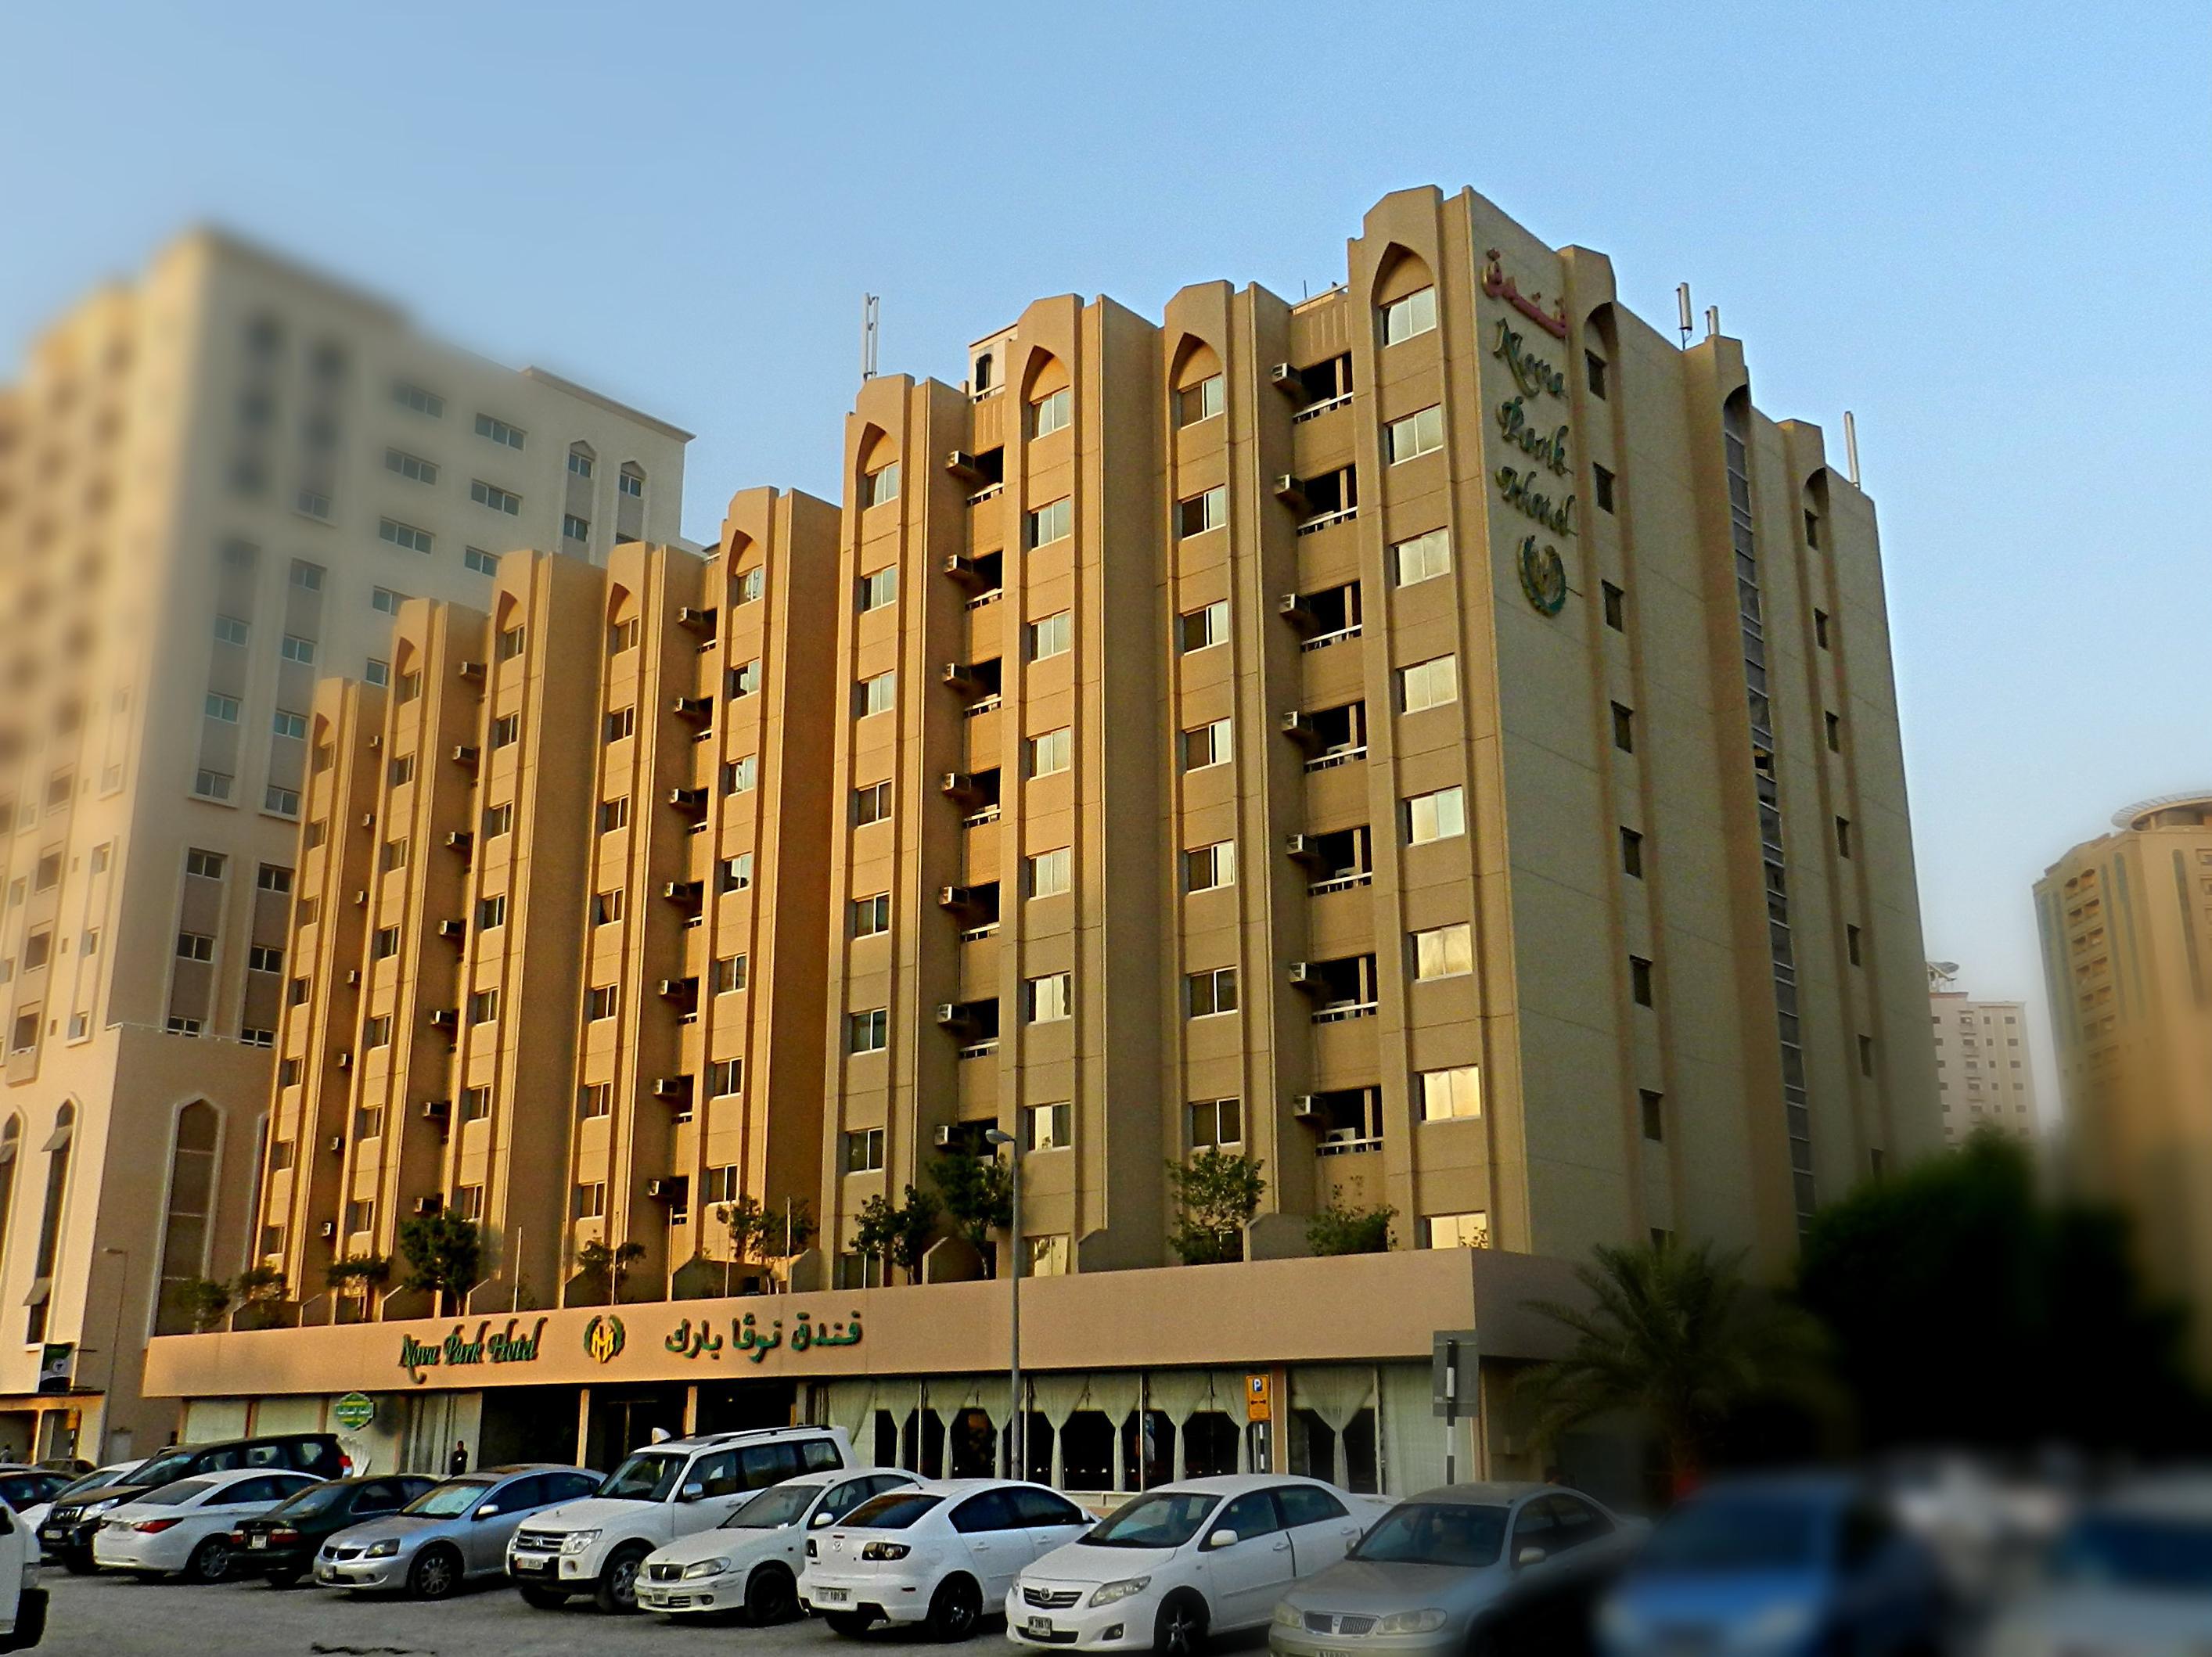 Nova Park Hotel Sharjah FAQ 2017, What facilities are there in Nova Park Hotel Sharjah 2017, What Languages Spoken are Supported in Nova Park Hotel Sharjah 2017, Which payment cards are accepted in Nova Park Hotel Sharjah , Sharjah Nova Park Hotel room facilities and services Q&A 2017, Sharjah Nova Park Hotel online booking services 2017, Sharjah Nova Park Hotel address 2017, Sharjah Nova Park Hotel telephone number 2017,Sharjah Nova Park Hotel map 2017, Sharjah Nova Park Hotel traffic guide 2017, how to go Sharjah Nova Park Hotel, Sharjah Nova Park Hotel booking online 2017, Sharjah Nova Park Hotel room types 2017.